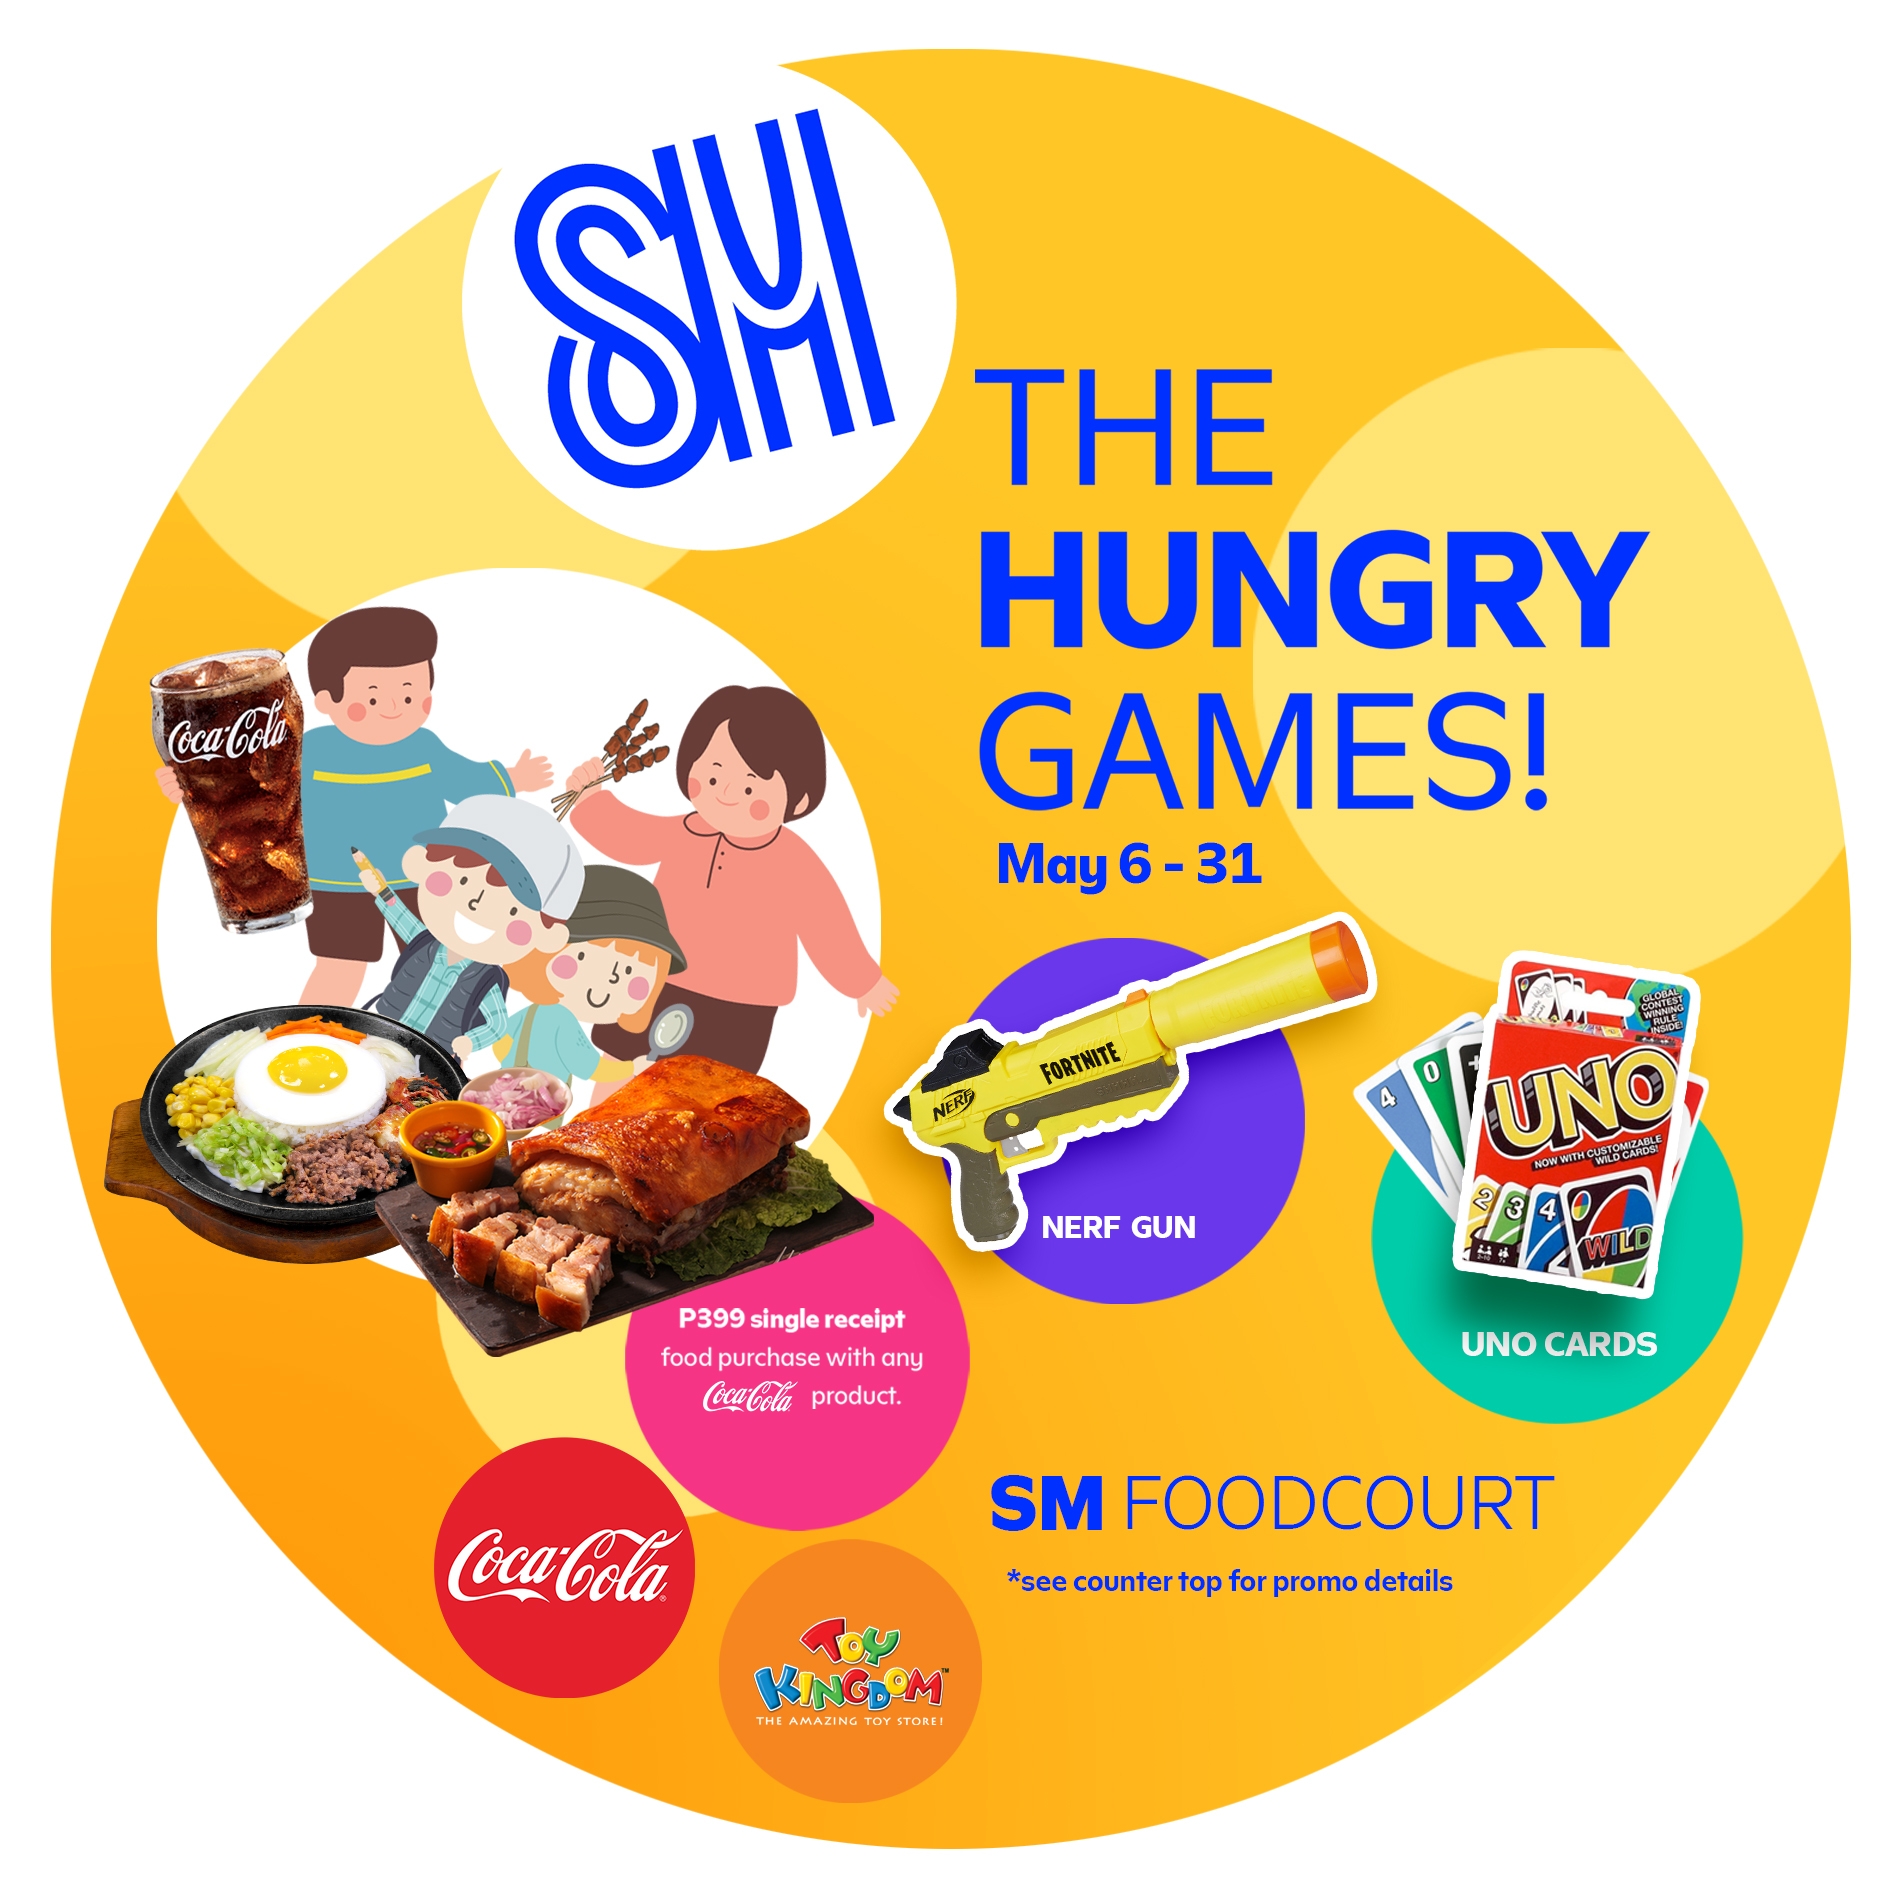 Join the Hungry Games At SM Foodcourt and win exciting toys!